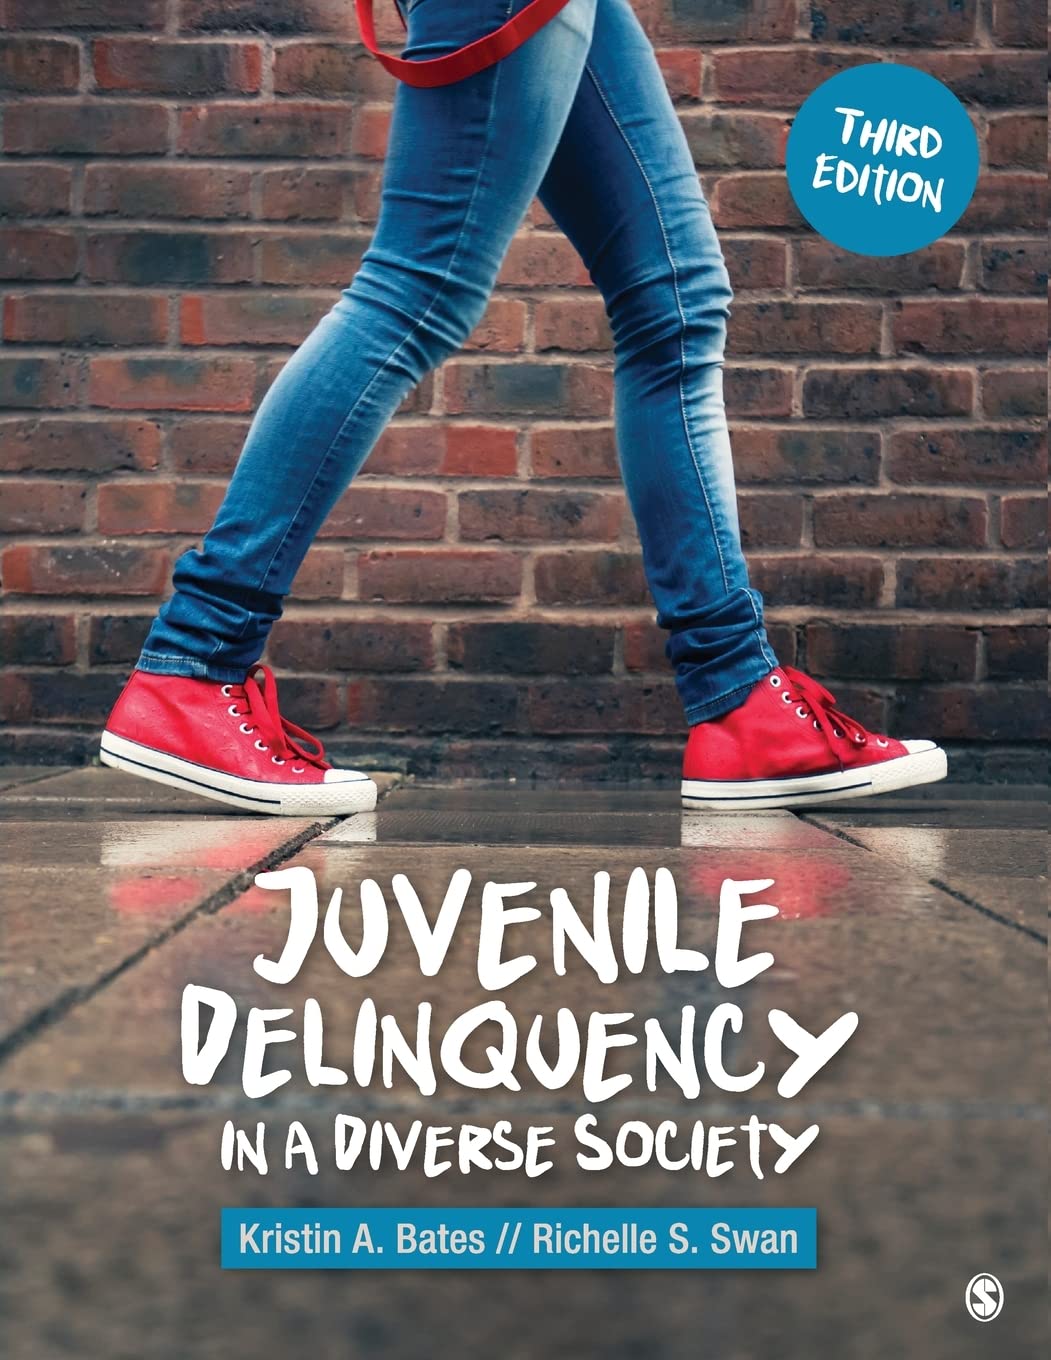 test bank and exams for Juvenile Delinquency in a Diverse Society